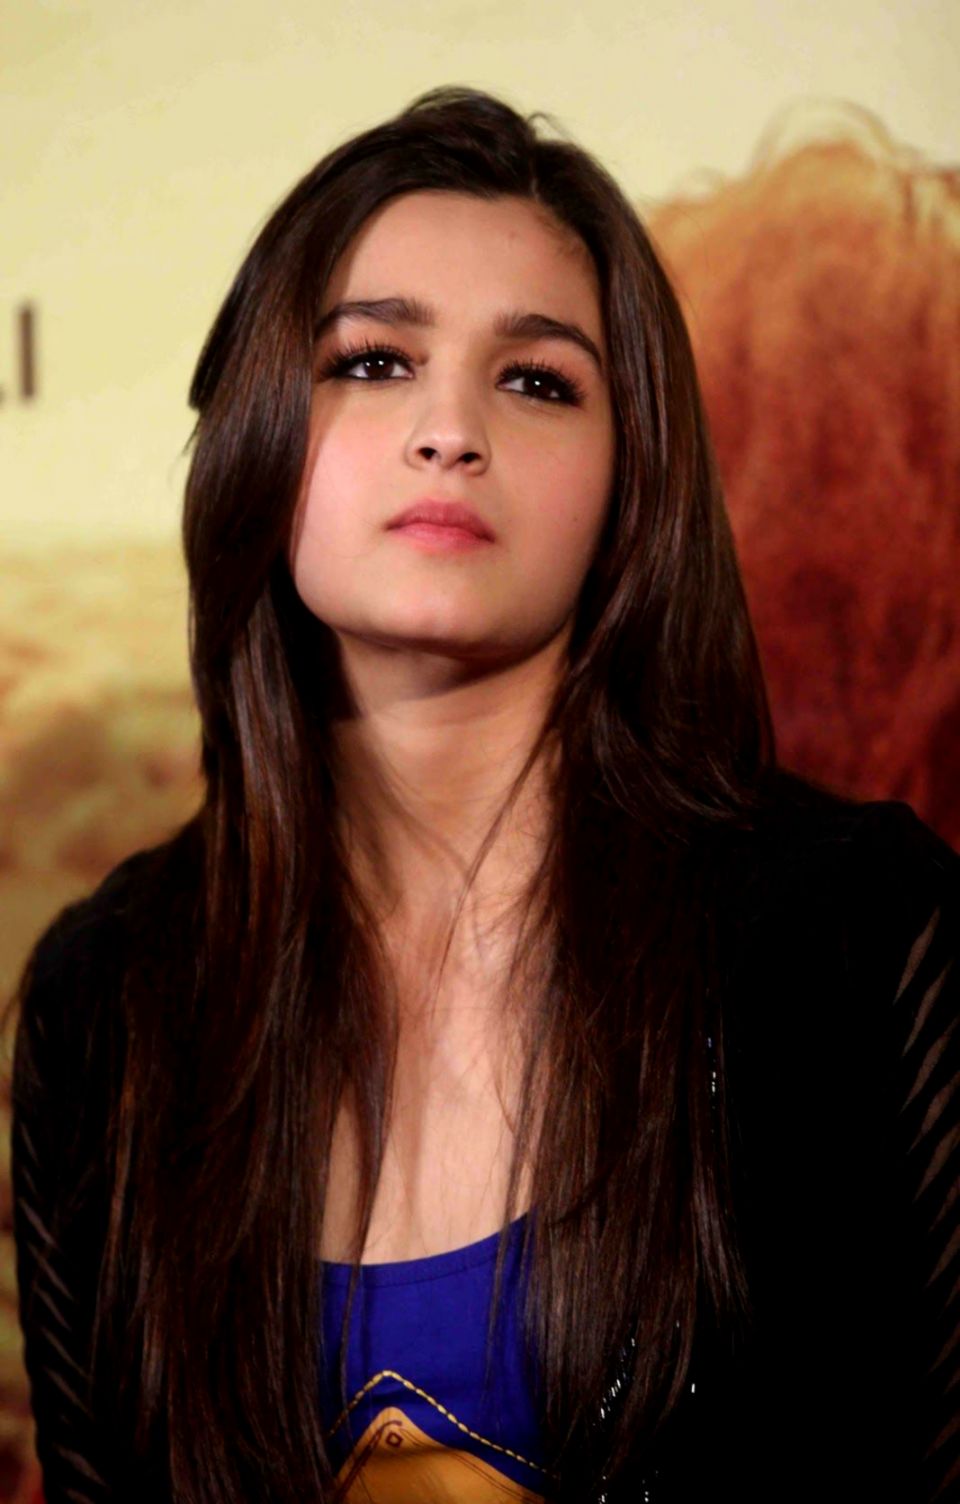 Alia Bhatt Wallpaper For Mobile - Actress With Baby Face - HD Wallpaper 